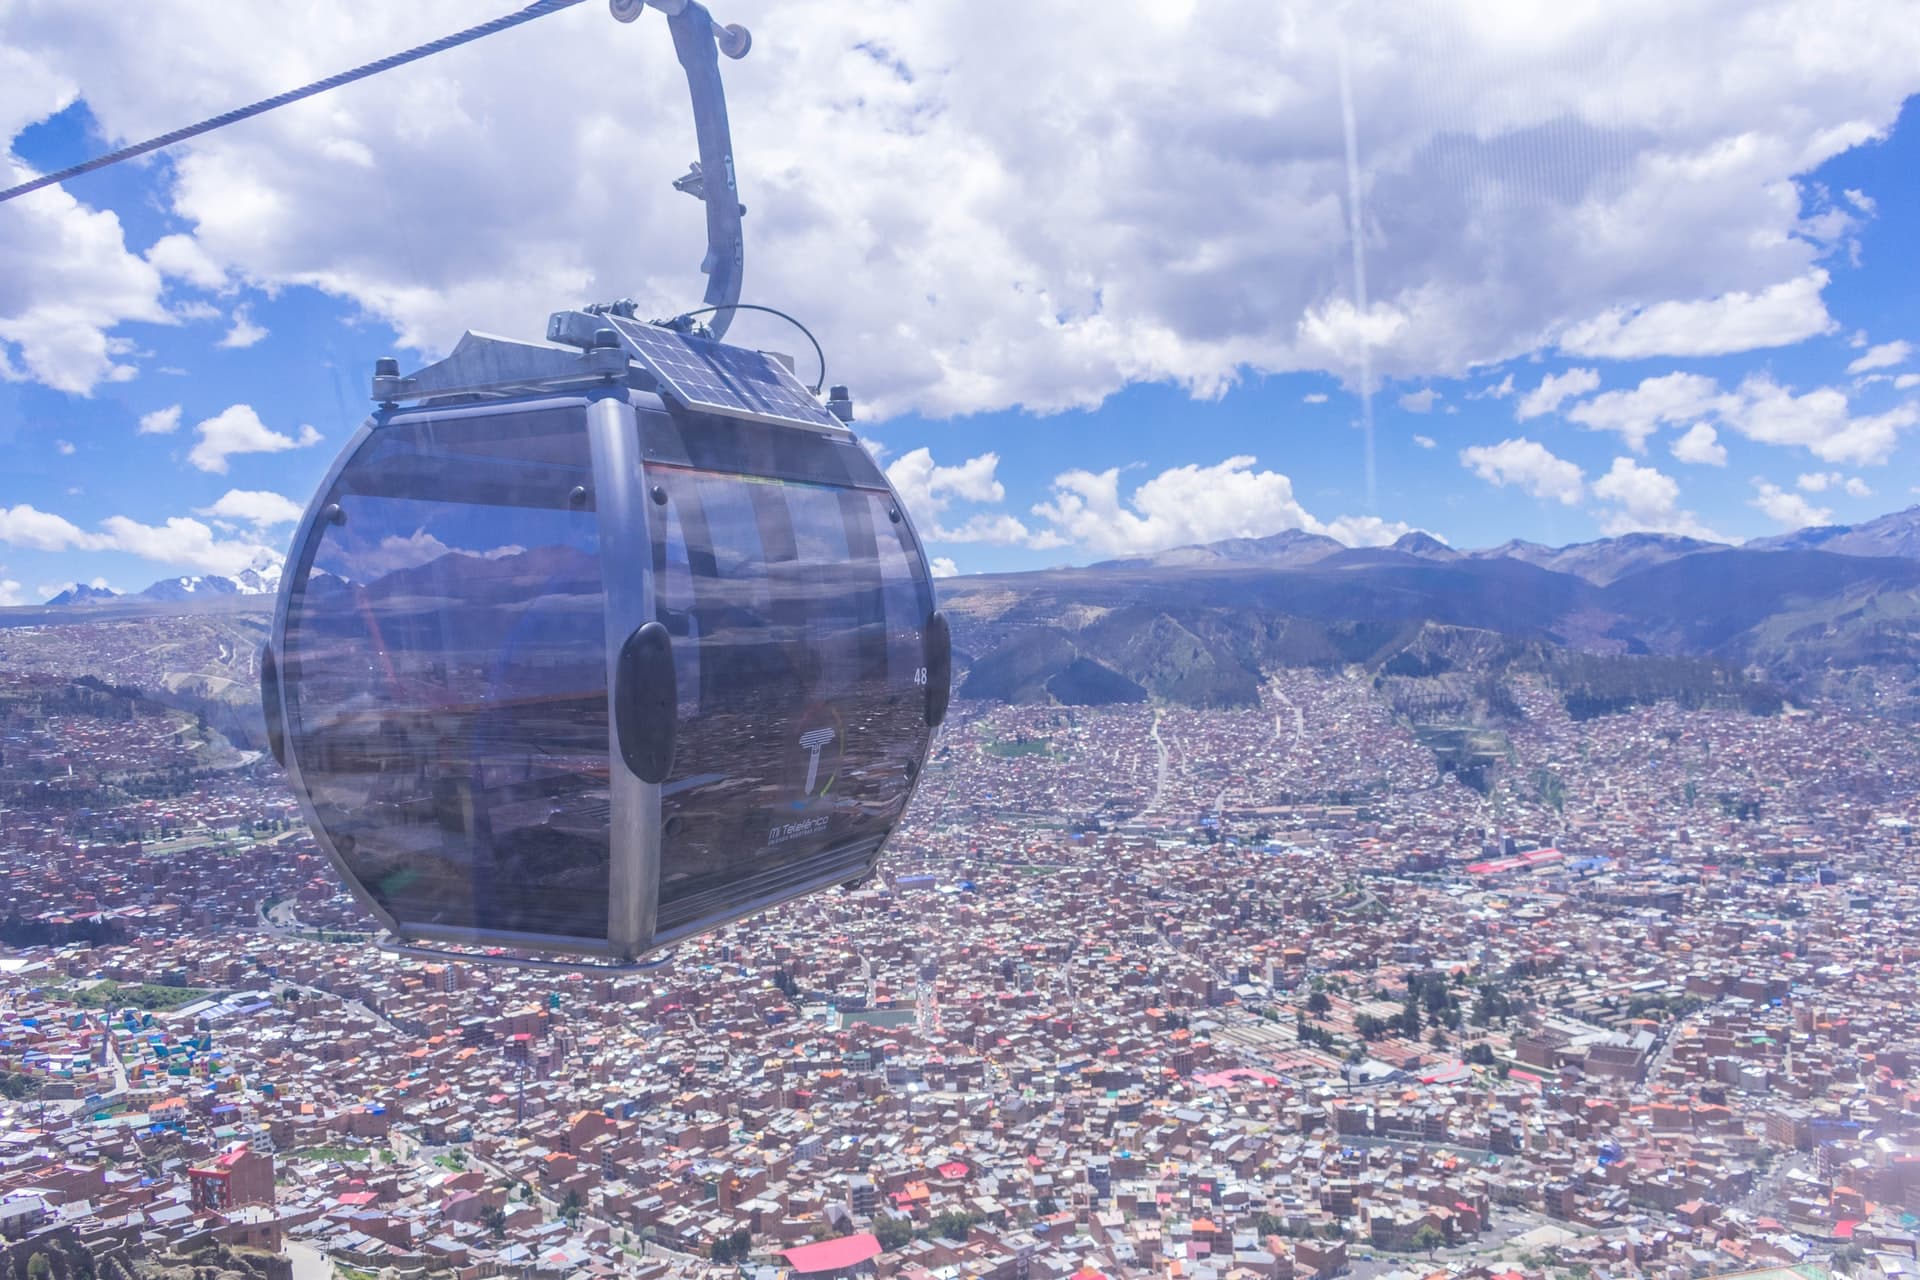 The Best Areas to Stay in La Paz, Bolivia